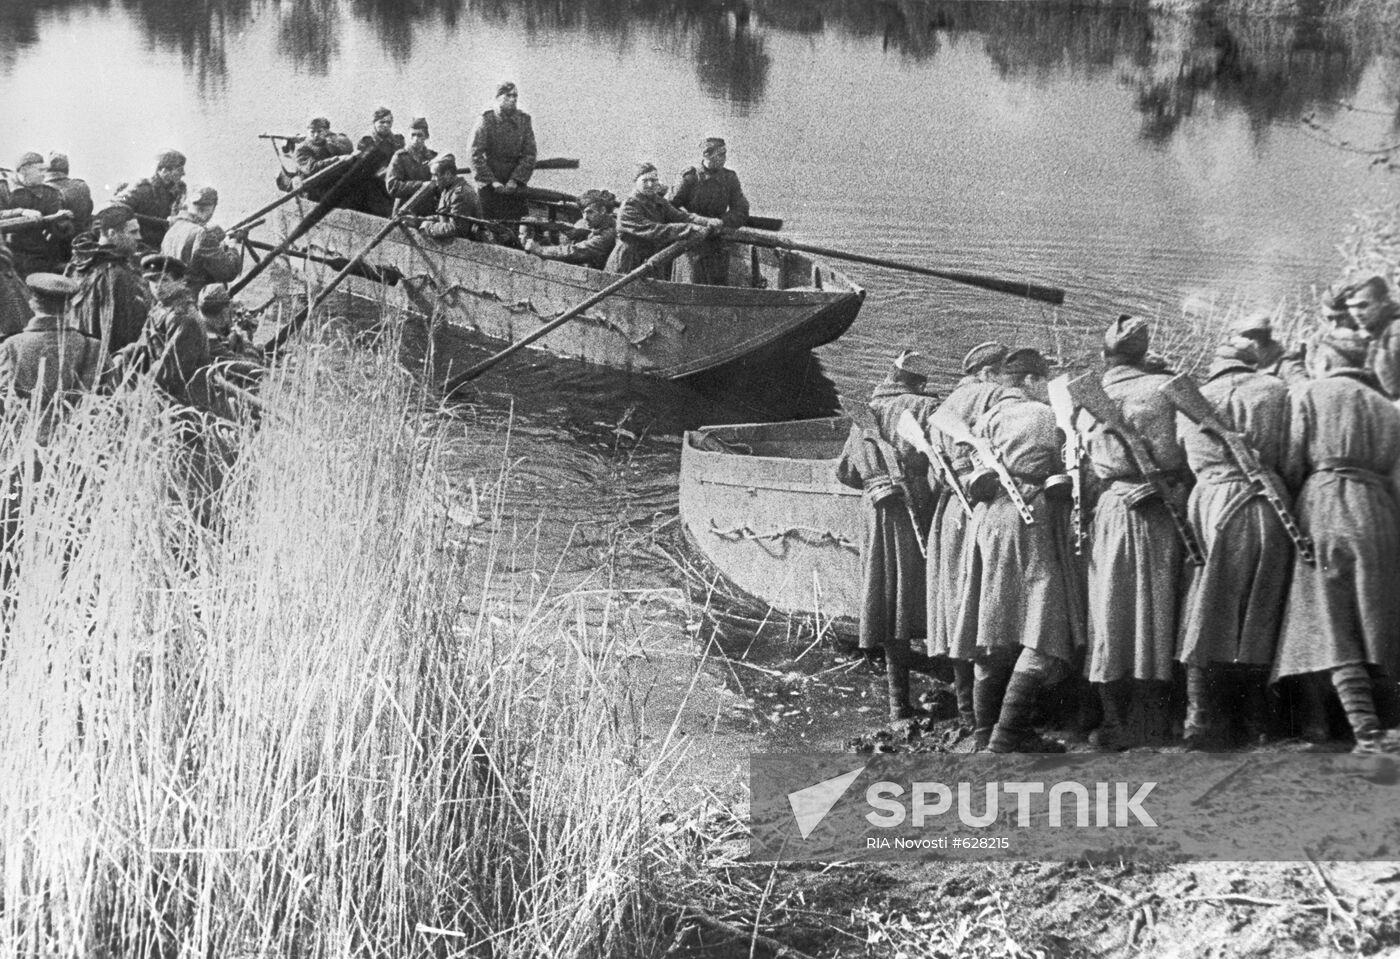 Infantry unit ferrying river